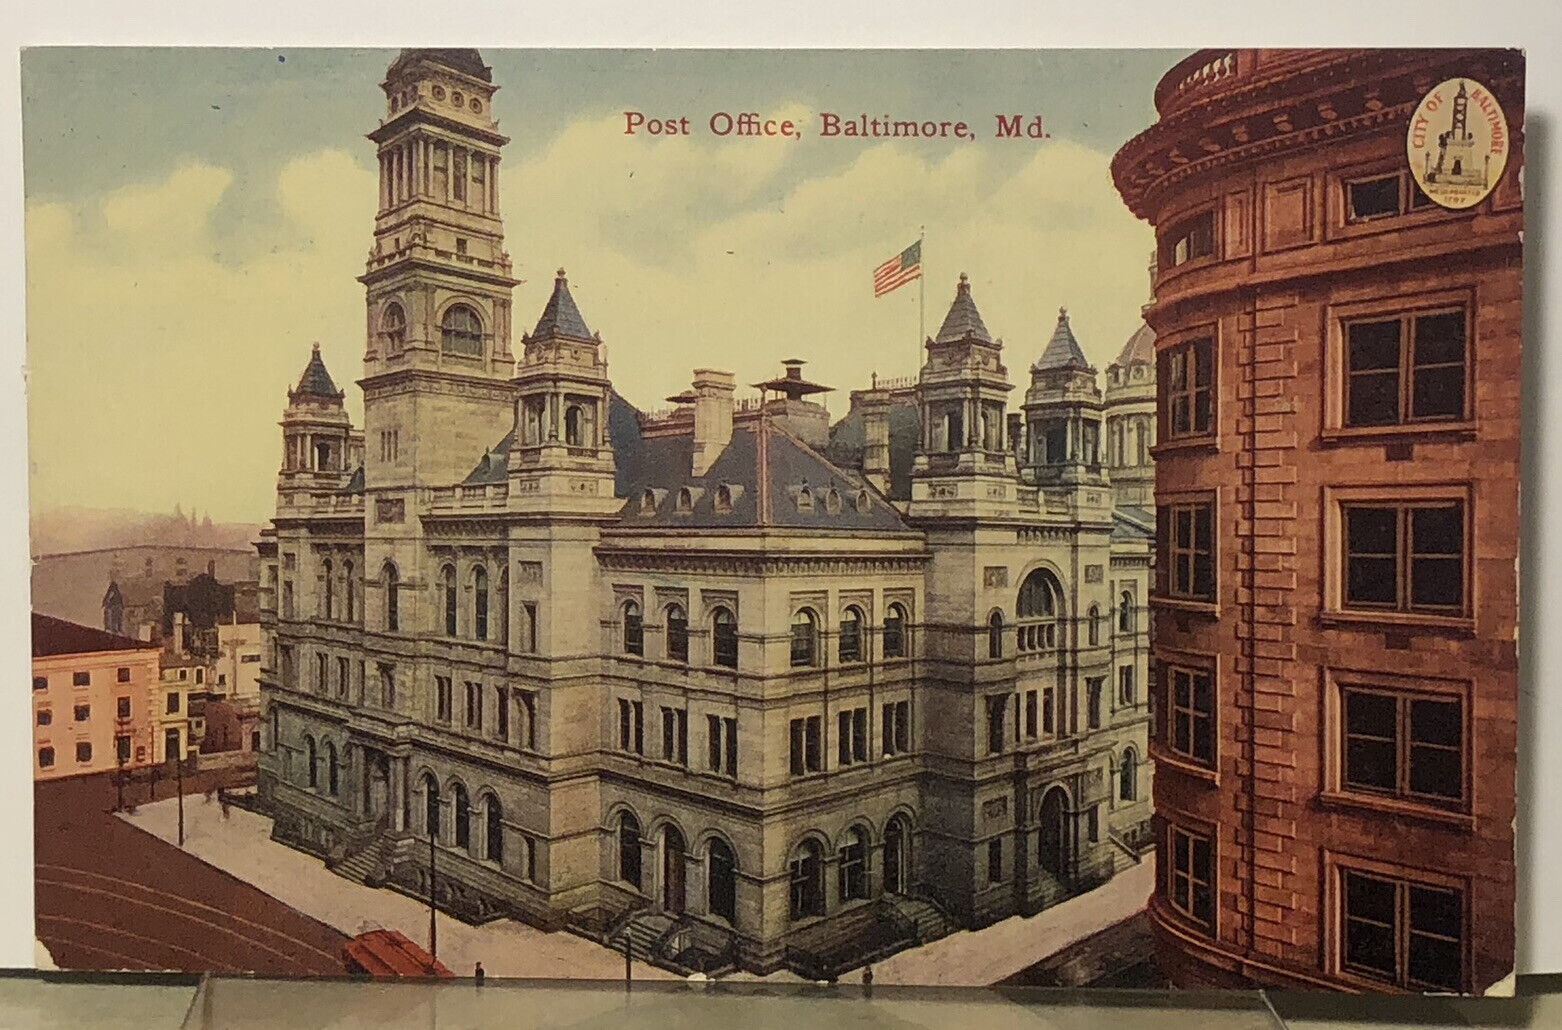 Postcard 1913 Baltimore,MD Post Office Building Maryland F.M. Kirby & Co.